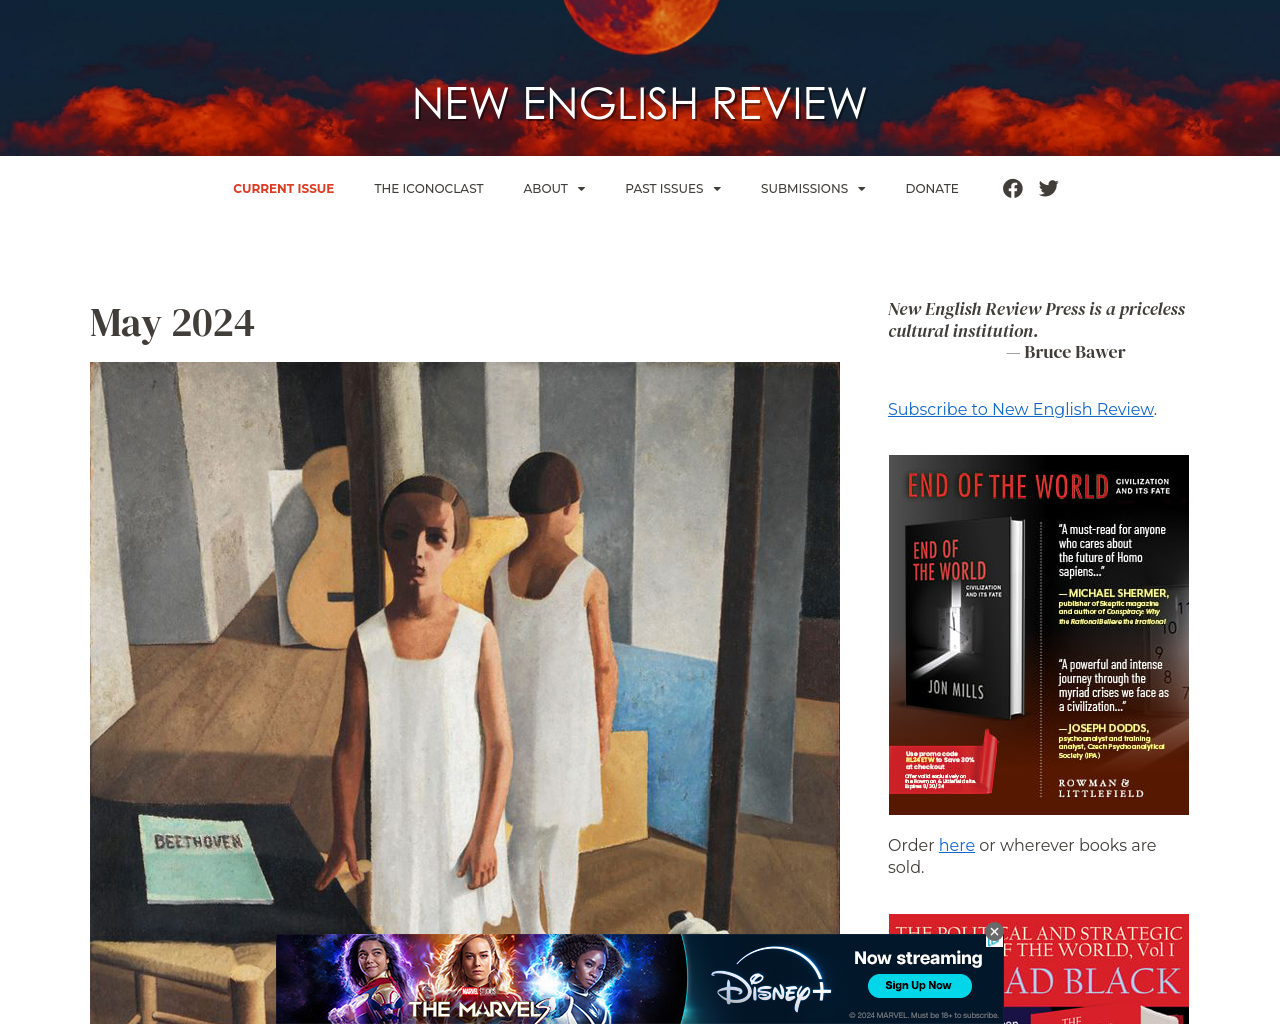 newenglishreview.org